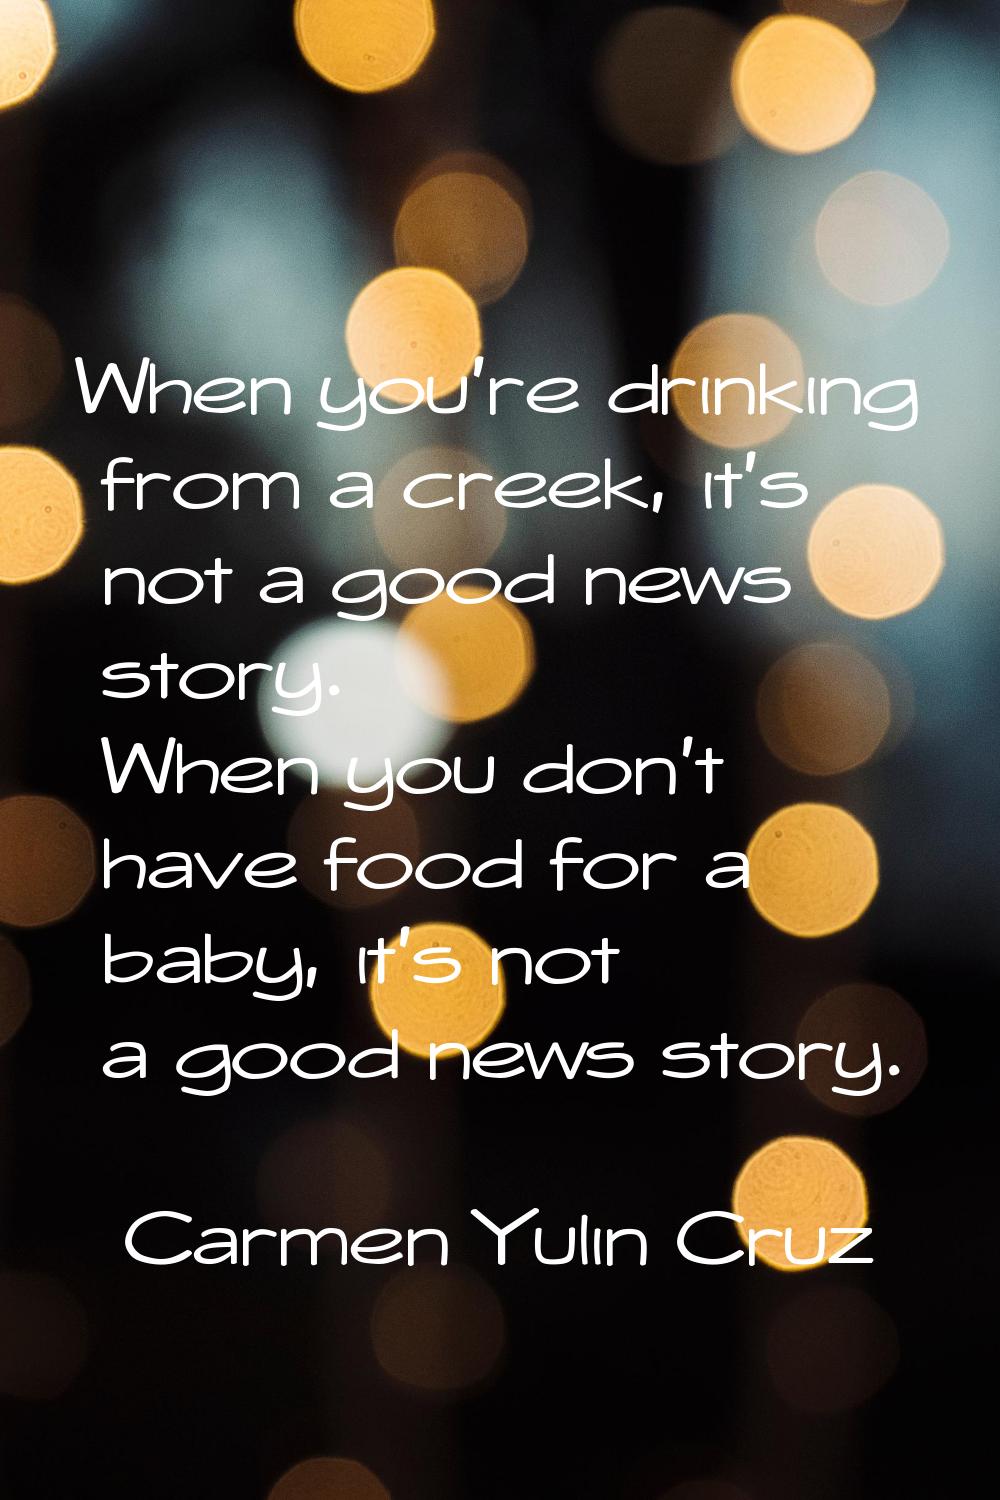 When you're drinking from a creek, it's not a good news story. When you don't have food for a baby,